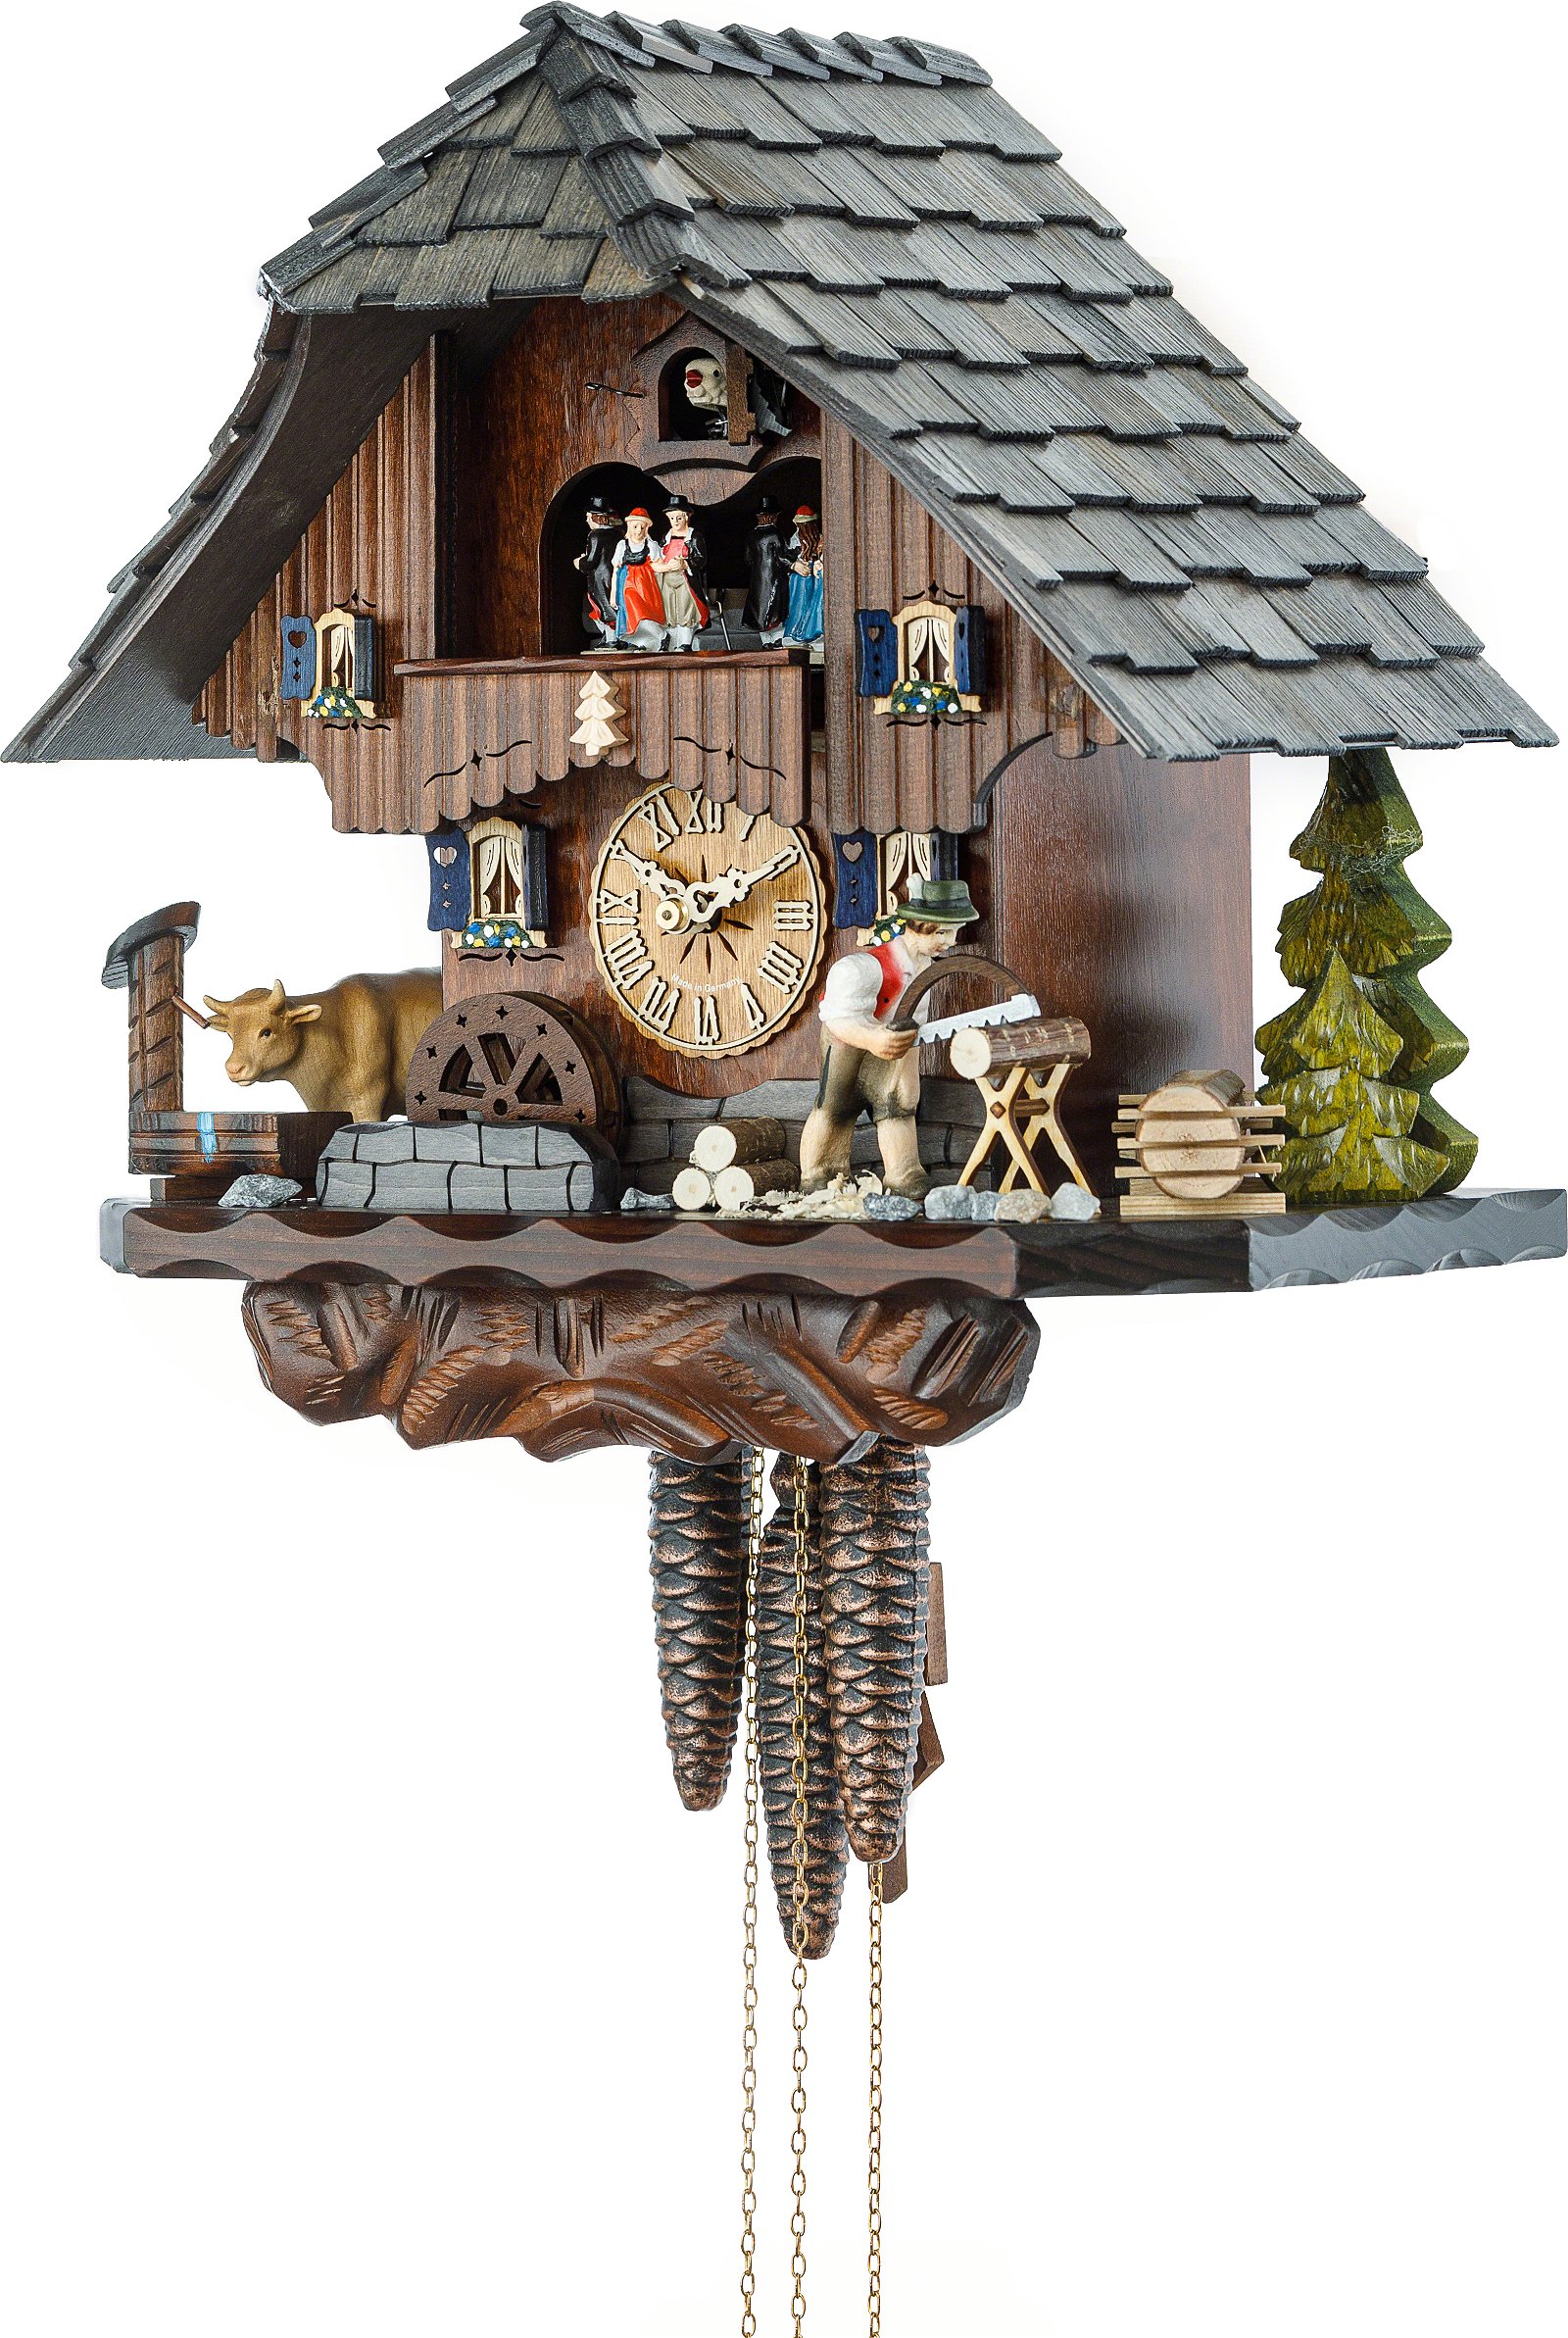 Cuckoo Clock Chalet Style 1 Day Movement 35cm by Hekas